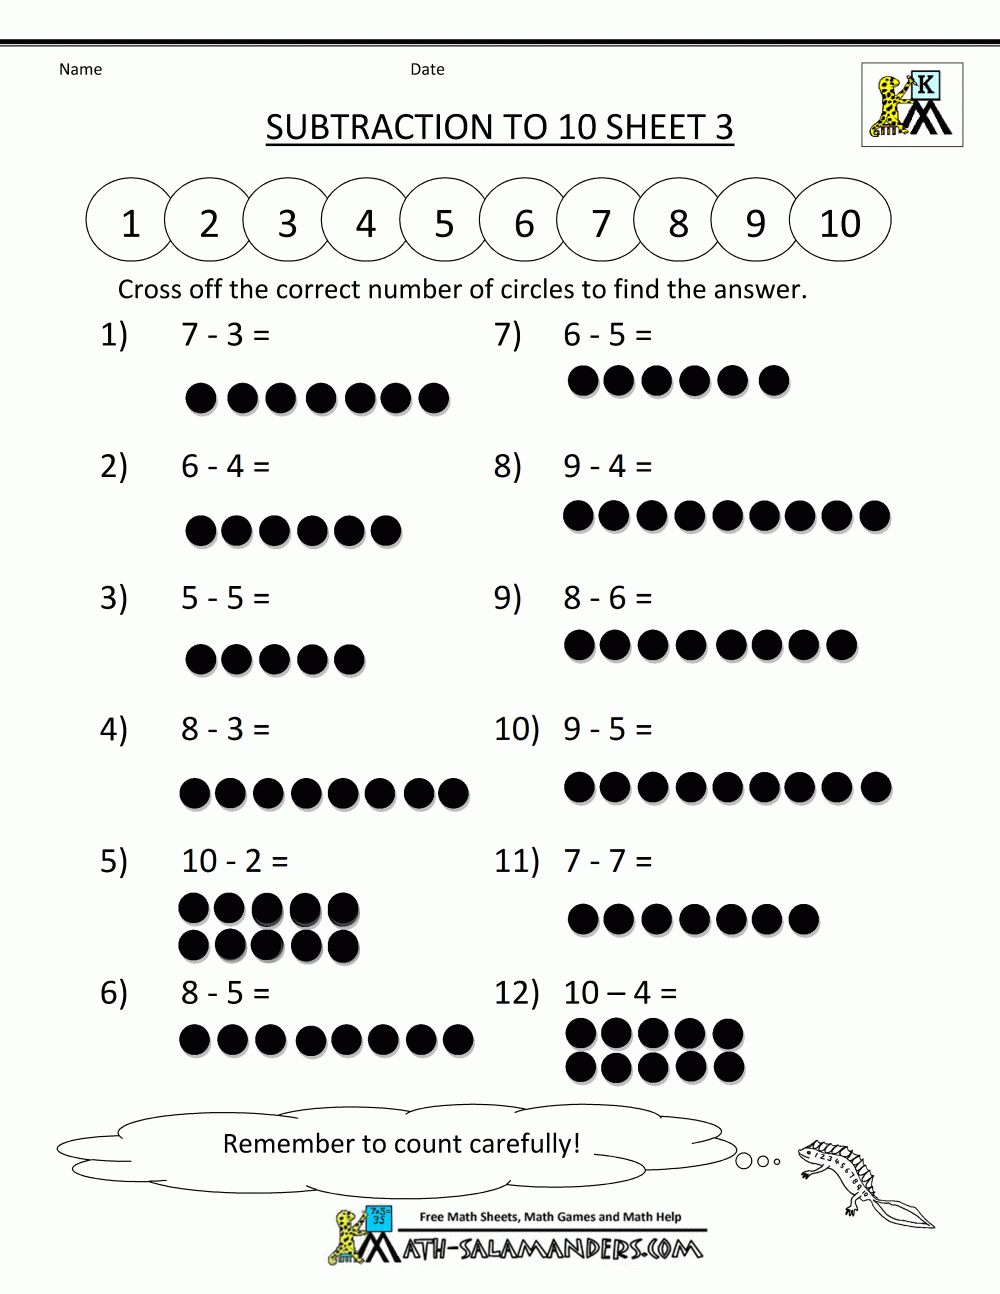 Addition And Subtraction Worksheets For Kindergarten In Free Math Worksheets For Kindergarten Addition And Subtraction